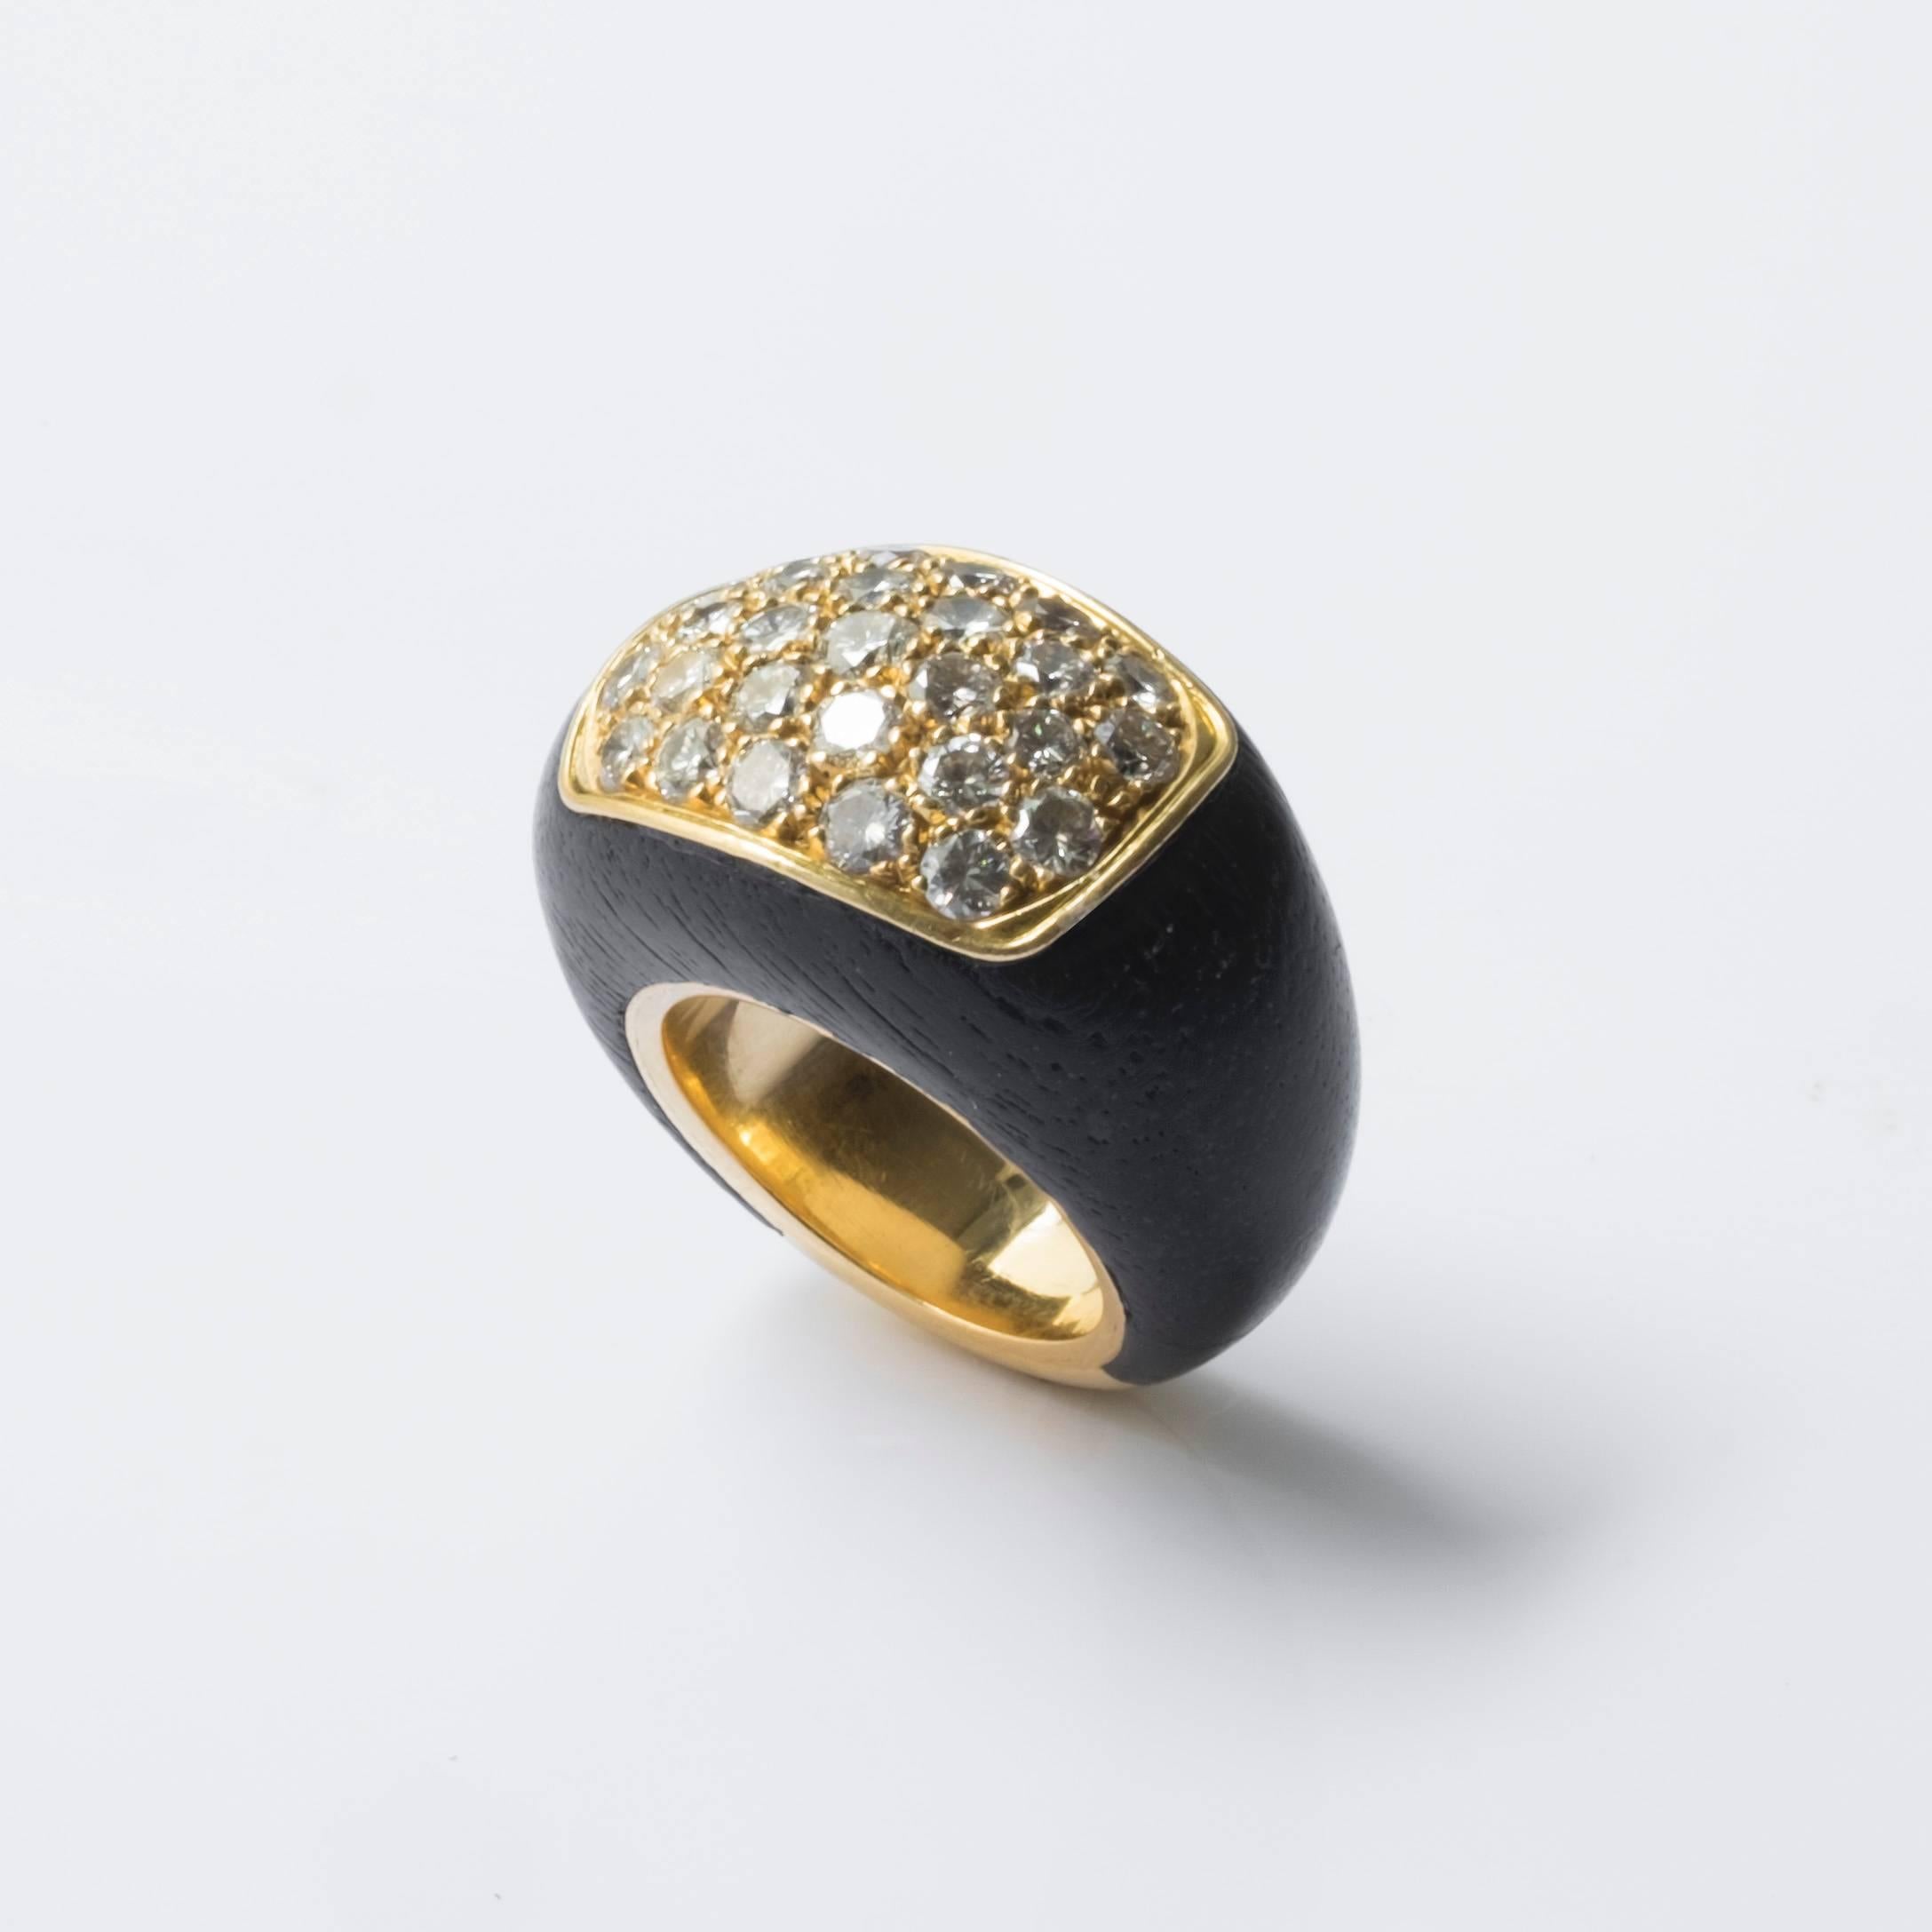 Ravishing ring by Rene Boivin composed of 18 karat gold, wood and diamonds. The ring is embellished with radiant diamonds set in grains, forming a circle at it’s center, and 18 karat gold surrounding the circumference of the circle. The rest of the